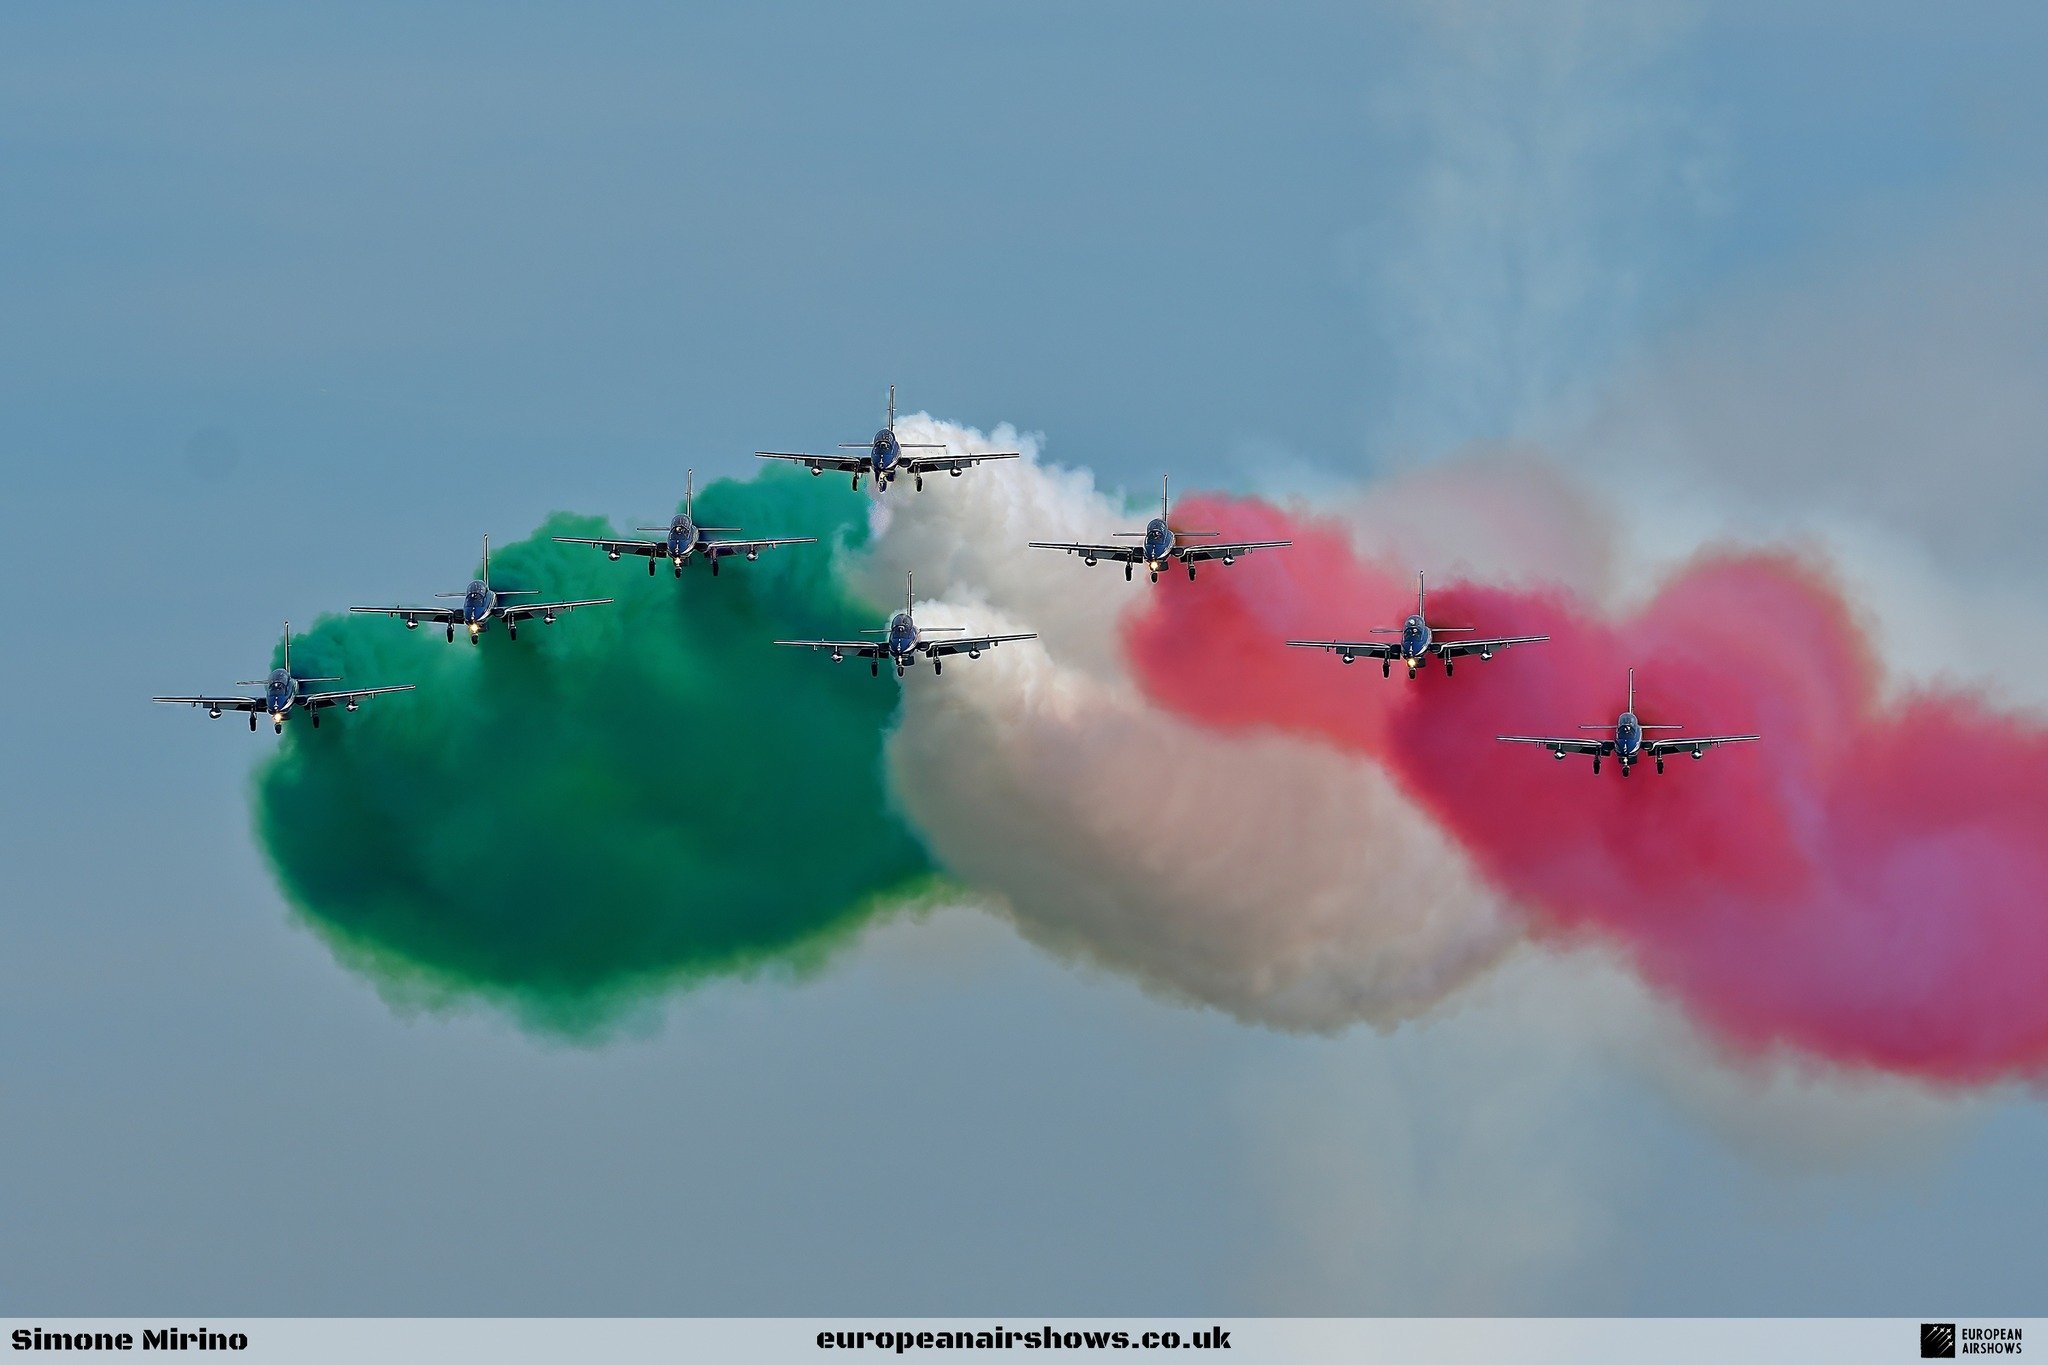 Check out some of our favourite shots from the Caorle Air Show 2024! We're just giving you a quick sneak peek, but stay tuned for more photos.

➖➖➖➖➖➖➖➖➖➖➖
🔽CHECK OUT 🔽
europeanairshows.co.uk
facebook.com/EuropeAirShows
twitter.com/EuroAirshow
inst